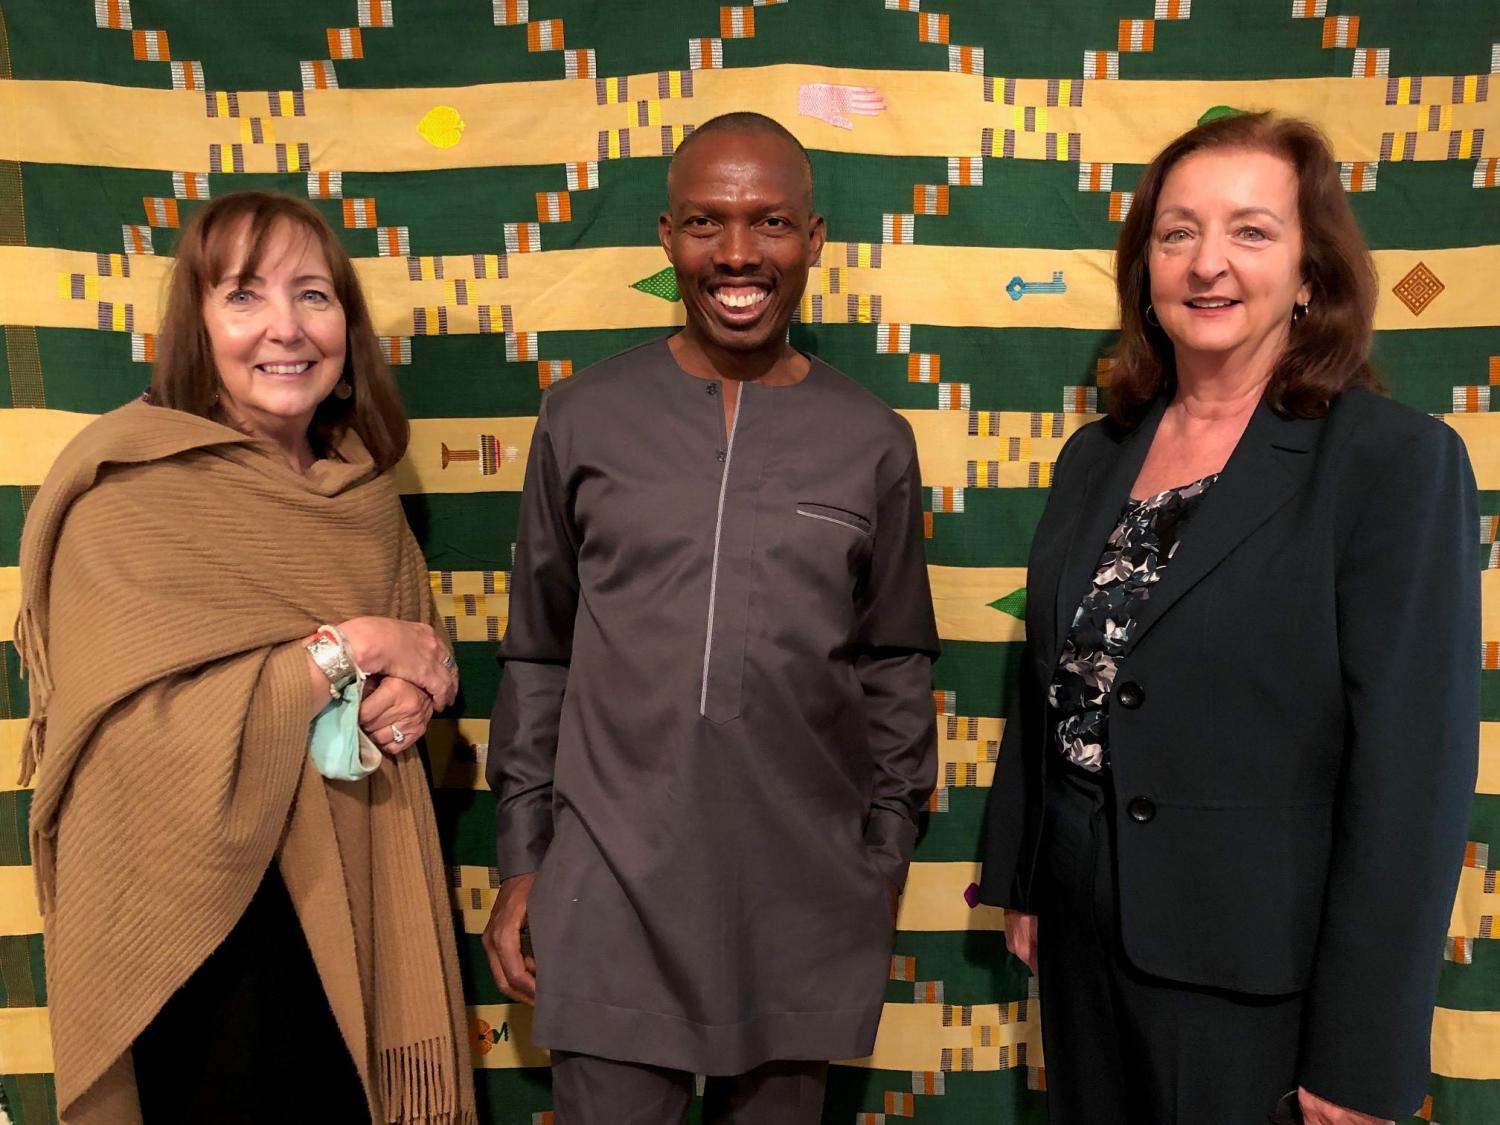 Chapuchi Bobbo Ahiagble, (center), a Master Weaver from Ghana with Dr. Bonnie Reese (left), BSC Associate Professor of Communications, and Dr. Tamara Ferguson, Interim Dean/BSC School of Education, Humanities, and Social Sciences, are pictured with one of his numerous cloth artwork creations on display at the College’s Hebert Gallery.